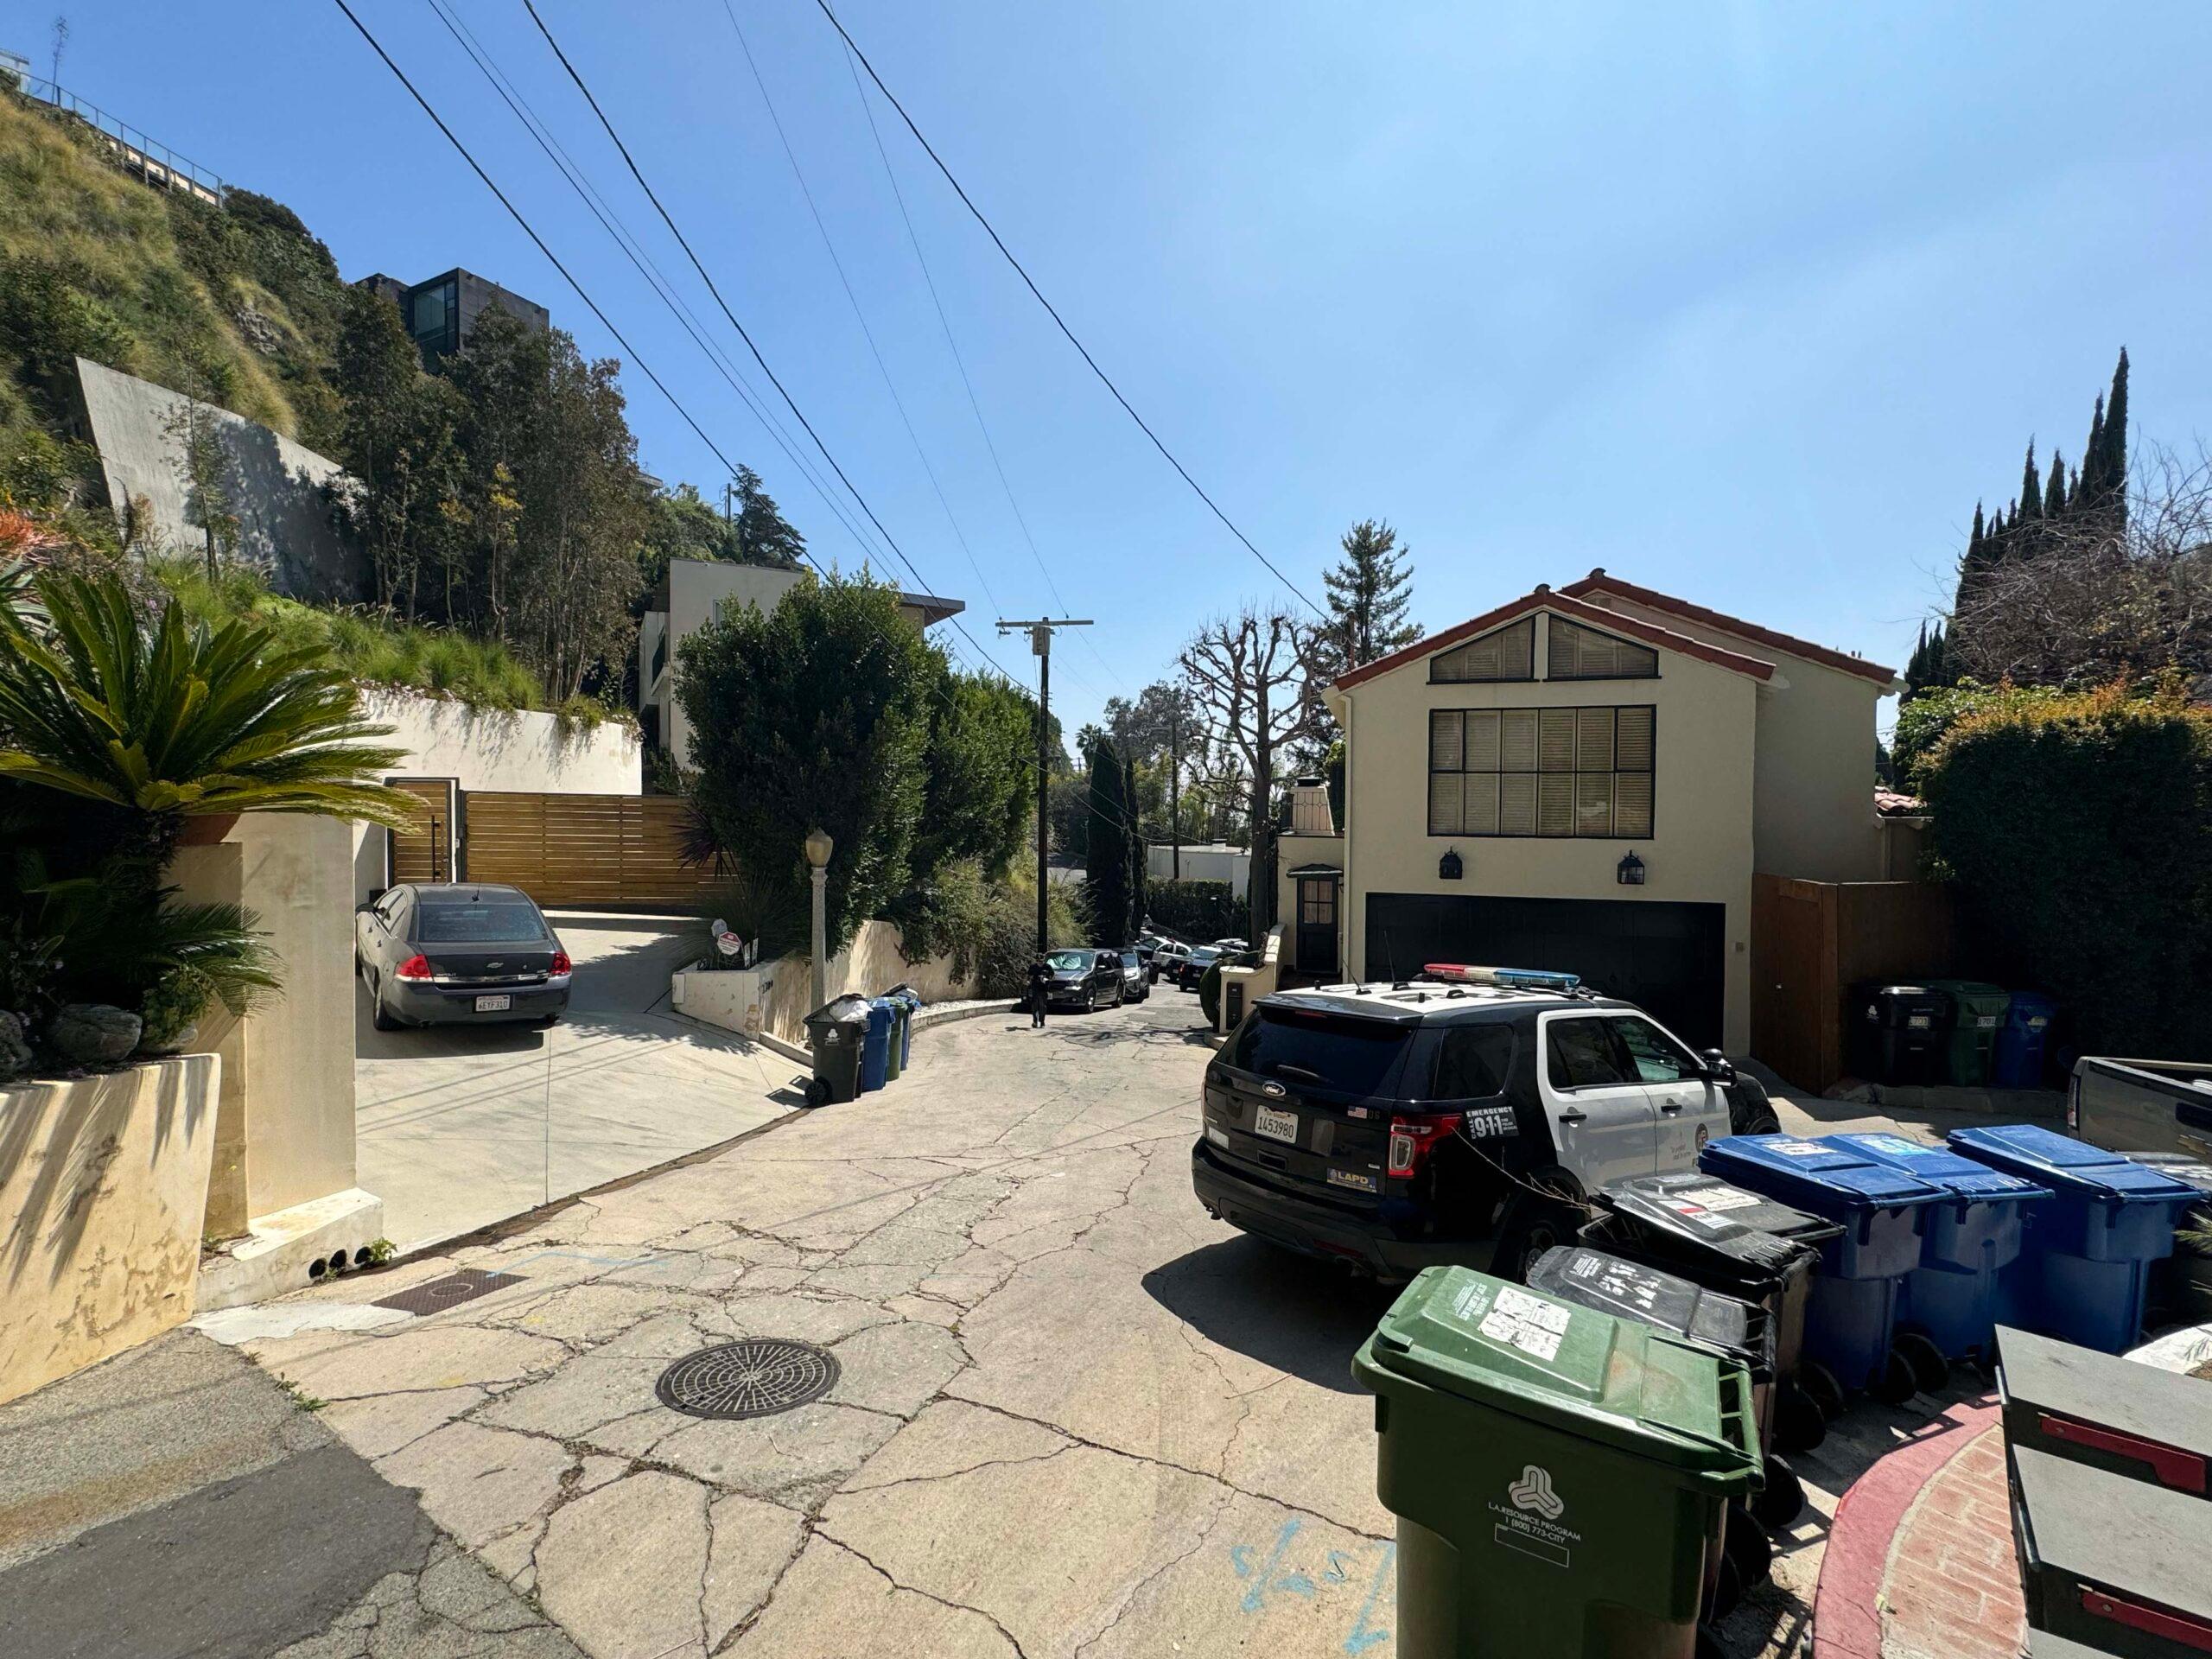 LAPD officers have their guns drawn at the home of 'SELLING SUNSET' Christine Quinn, according to witnesses a police were shouting 'Come out with your hands up'.